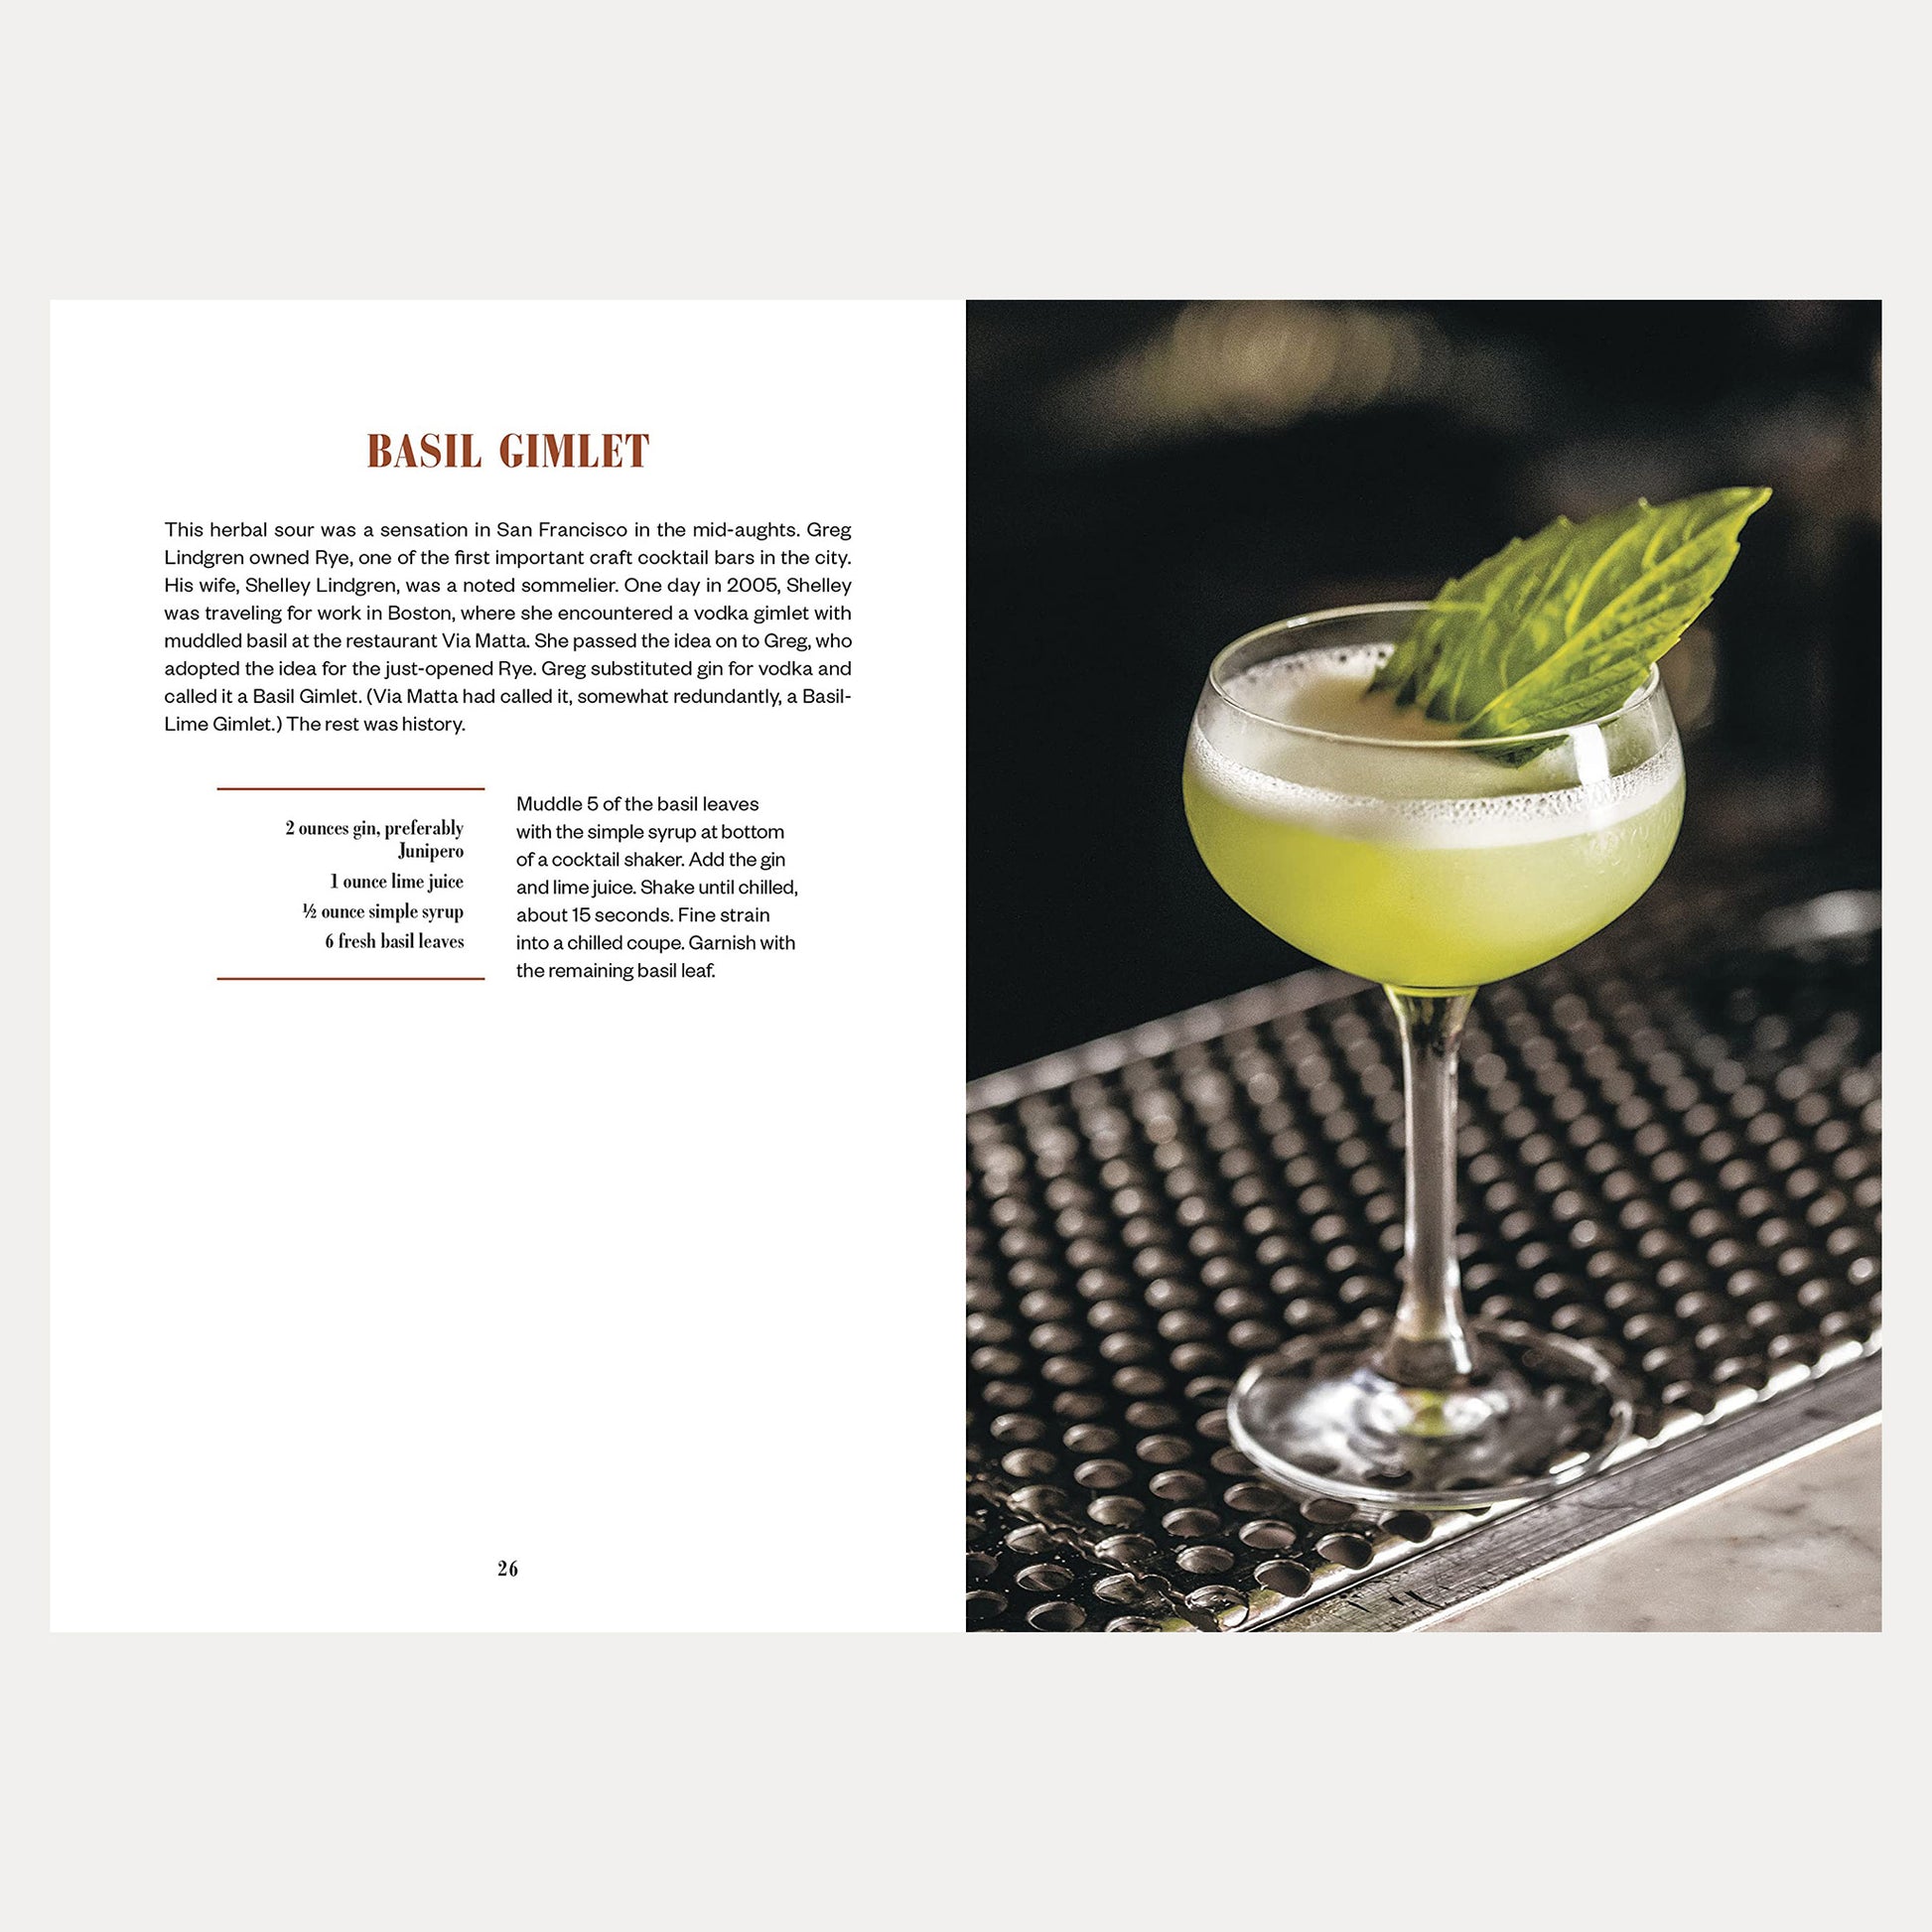 Modern Classic Cocktails: 60+ Stories and Recipes from the New Golden Age in Drinks